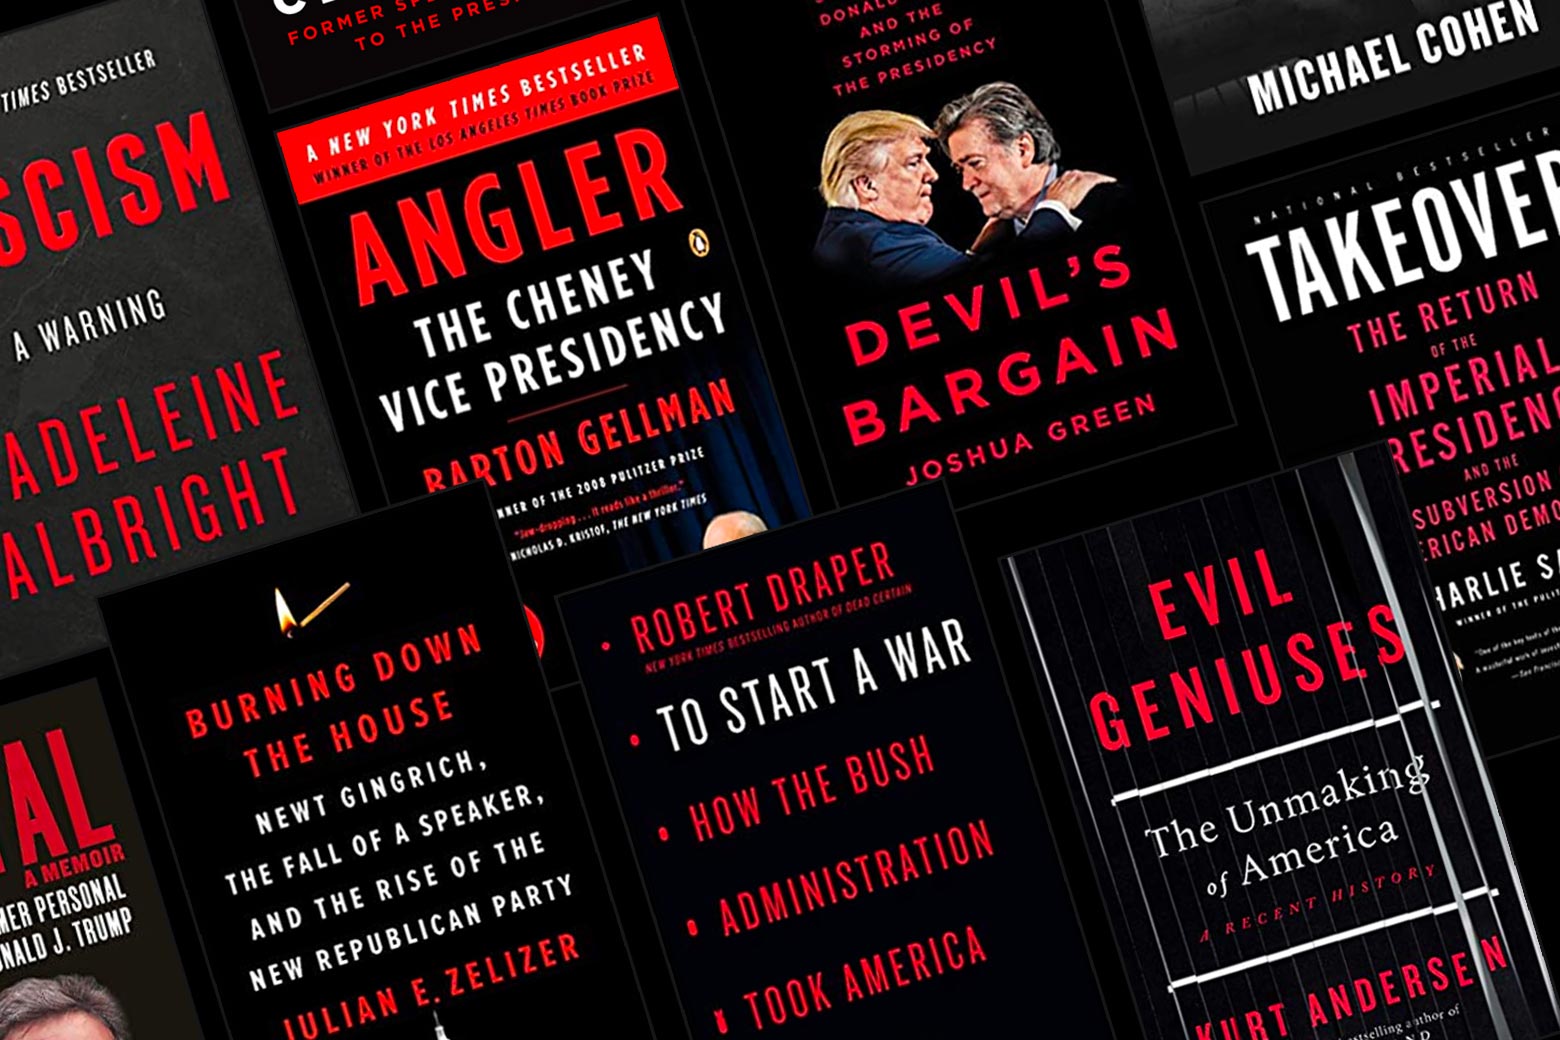 A collage of book covers for Angler, To Start a War, Burning Down the House, Evil Geniuses, Takeover, and Fascism: A Warning shows that they're all remarkably similar: Red and white sans serif fonts, black backgrounds, minimal imagery